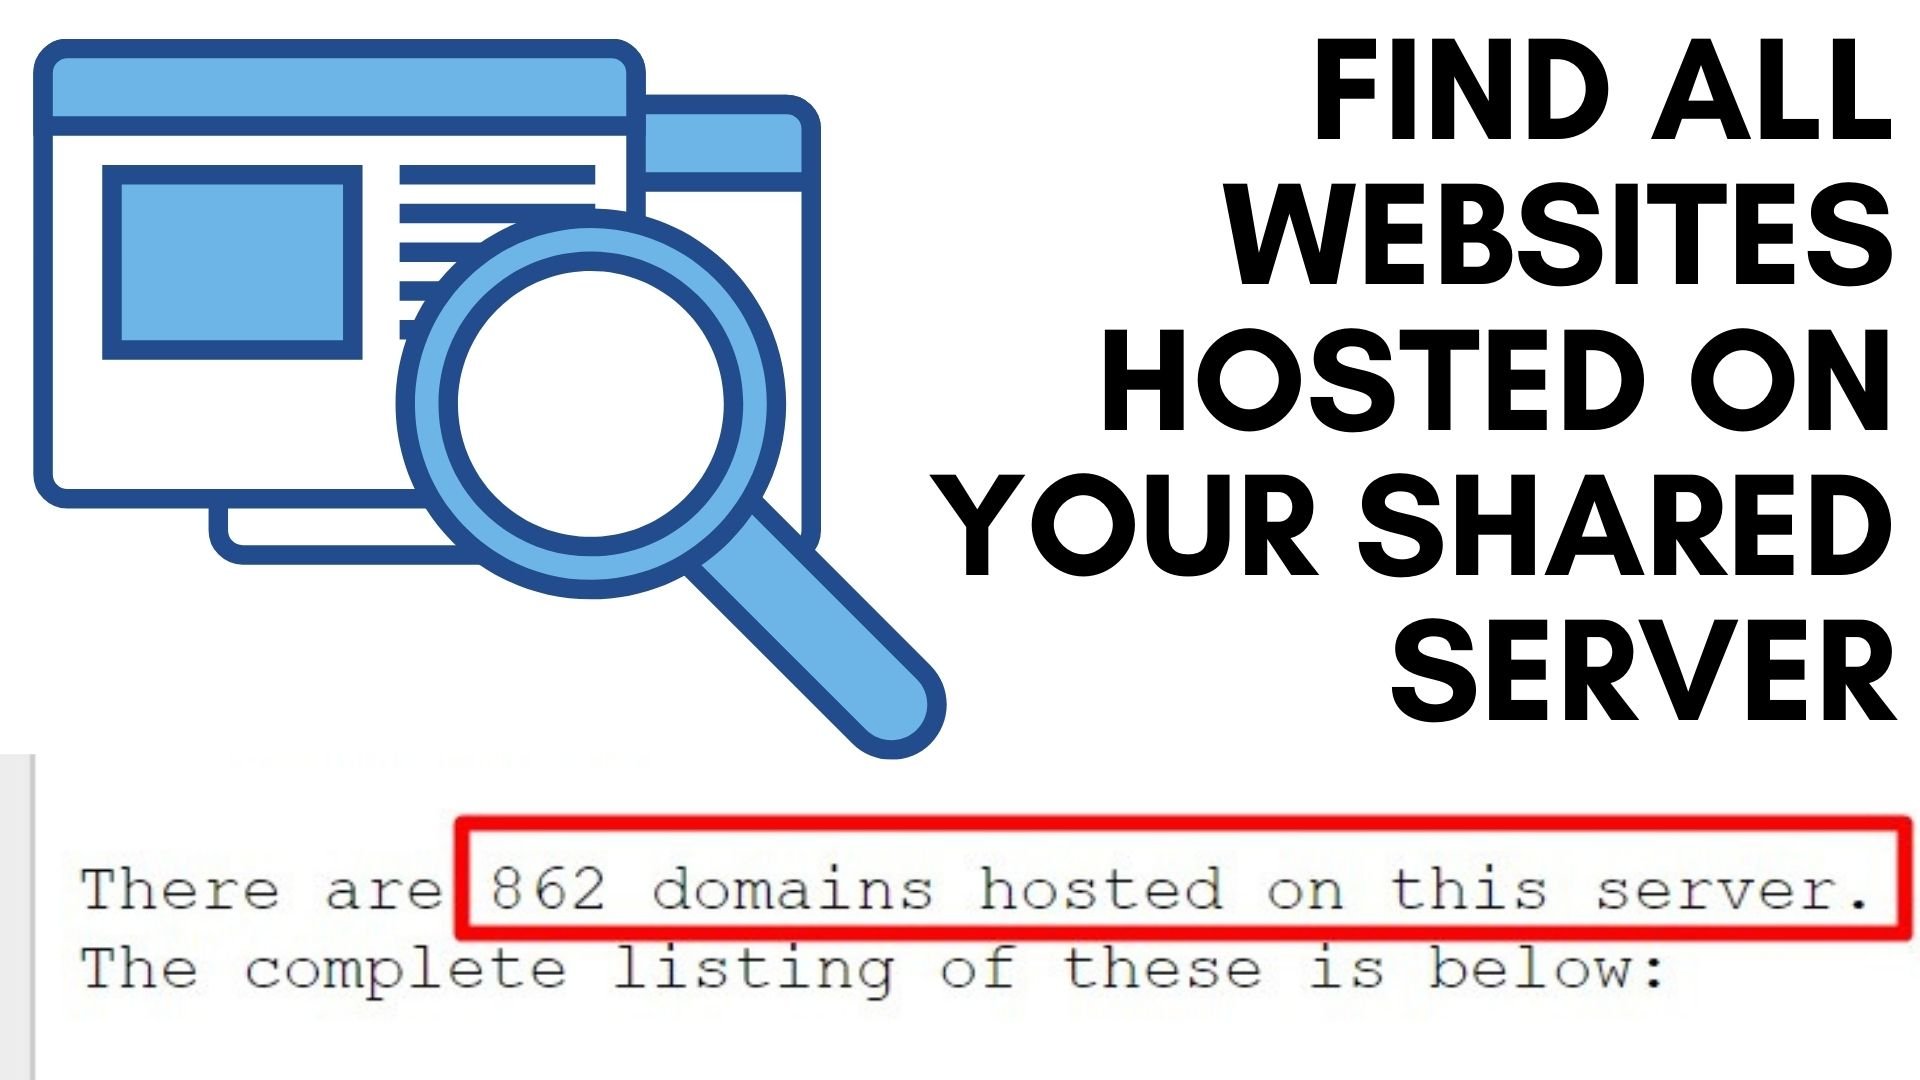 2 ways to Easily Find All Websites Hosted on your Shared Server